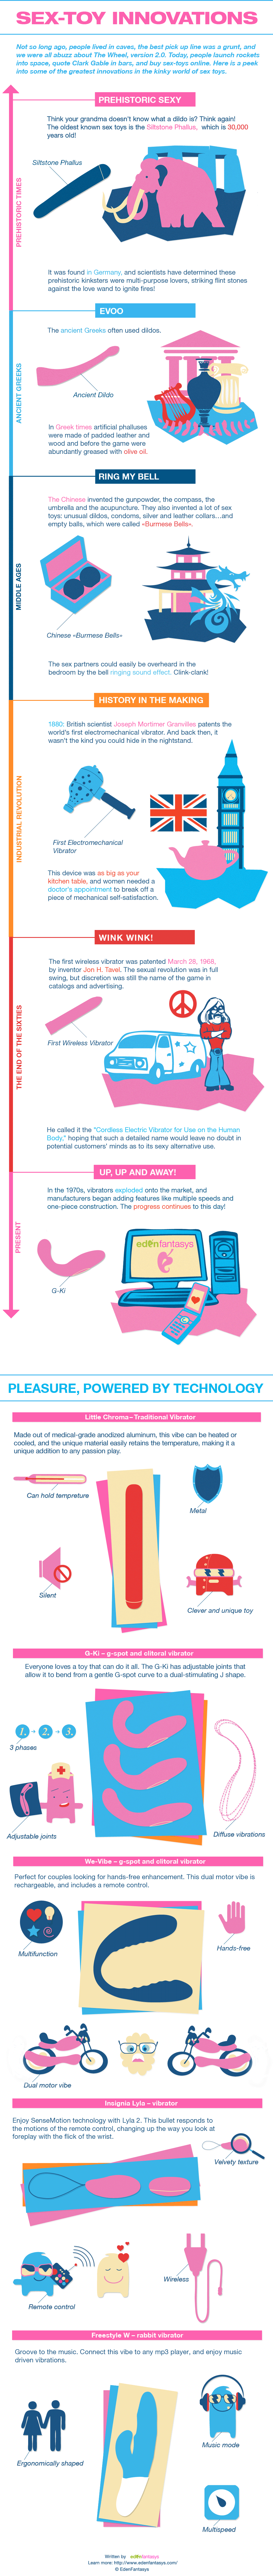 Fun Facts about Sexy Toy Innovations!